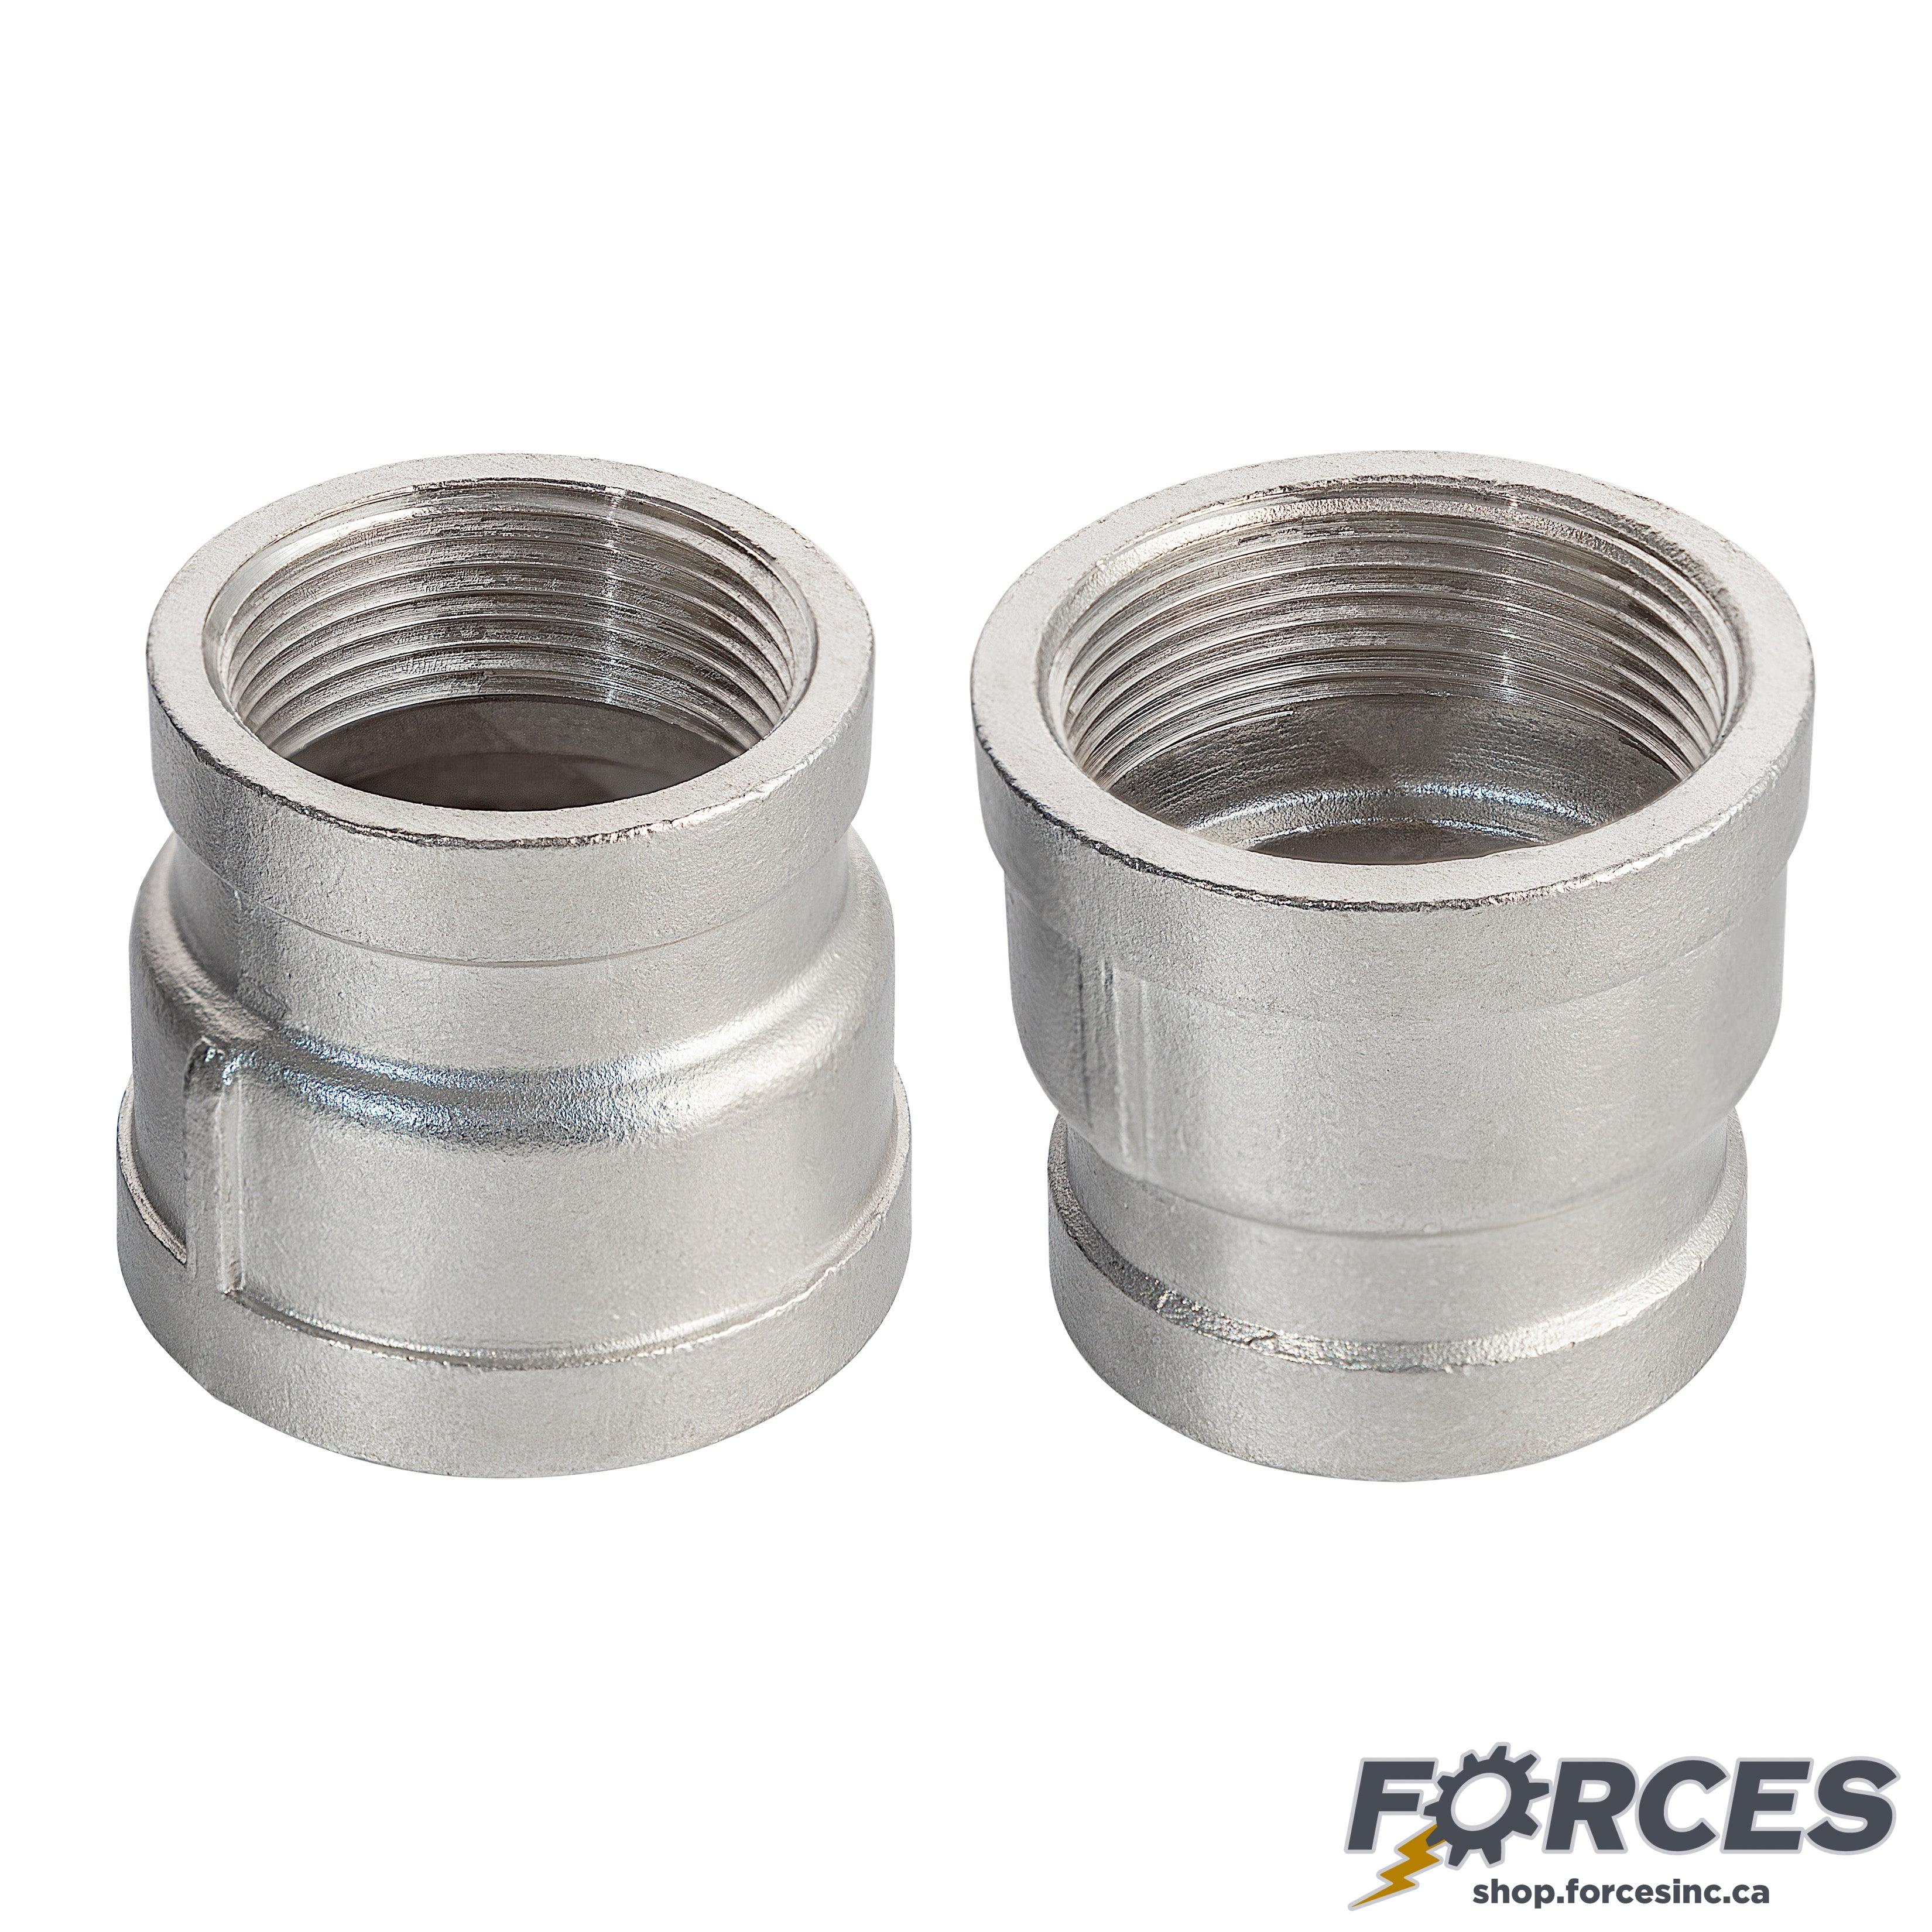 1/2" x 1/8" Coupling Reducer NPT #150 - Stainless Steel 316 - Forces Inc